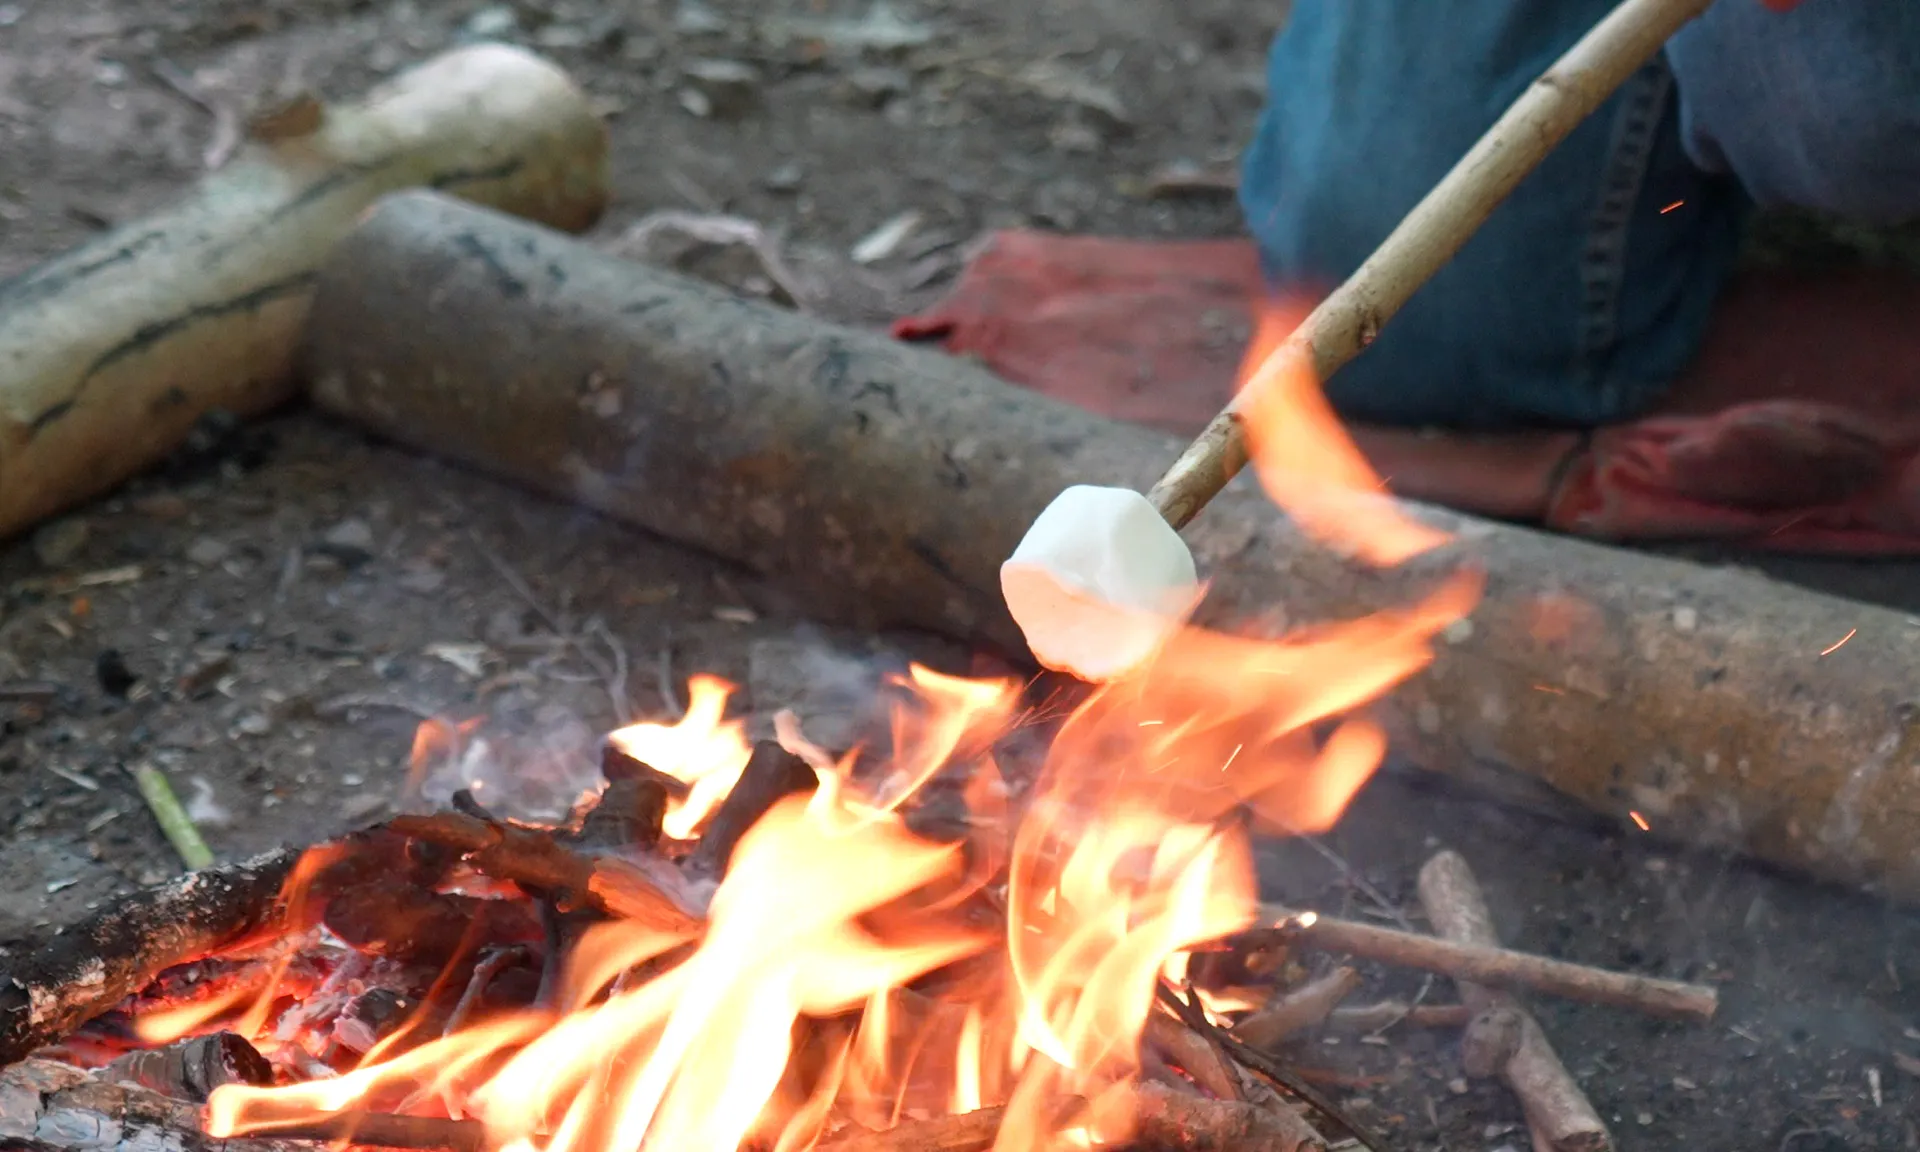 A close up of someone roasting a marshmallow.